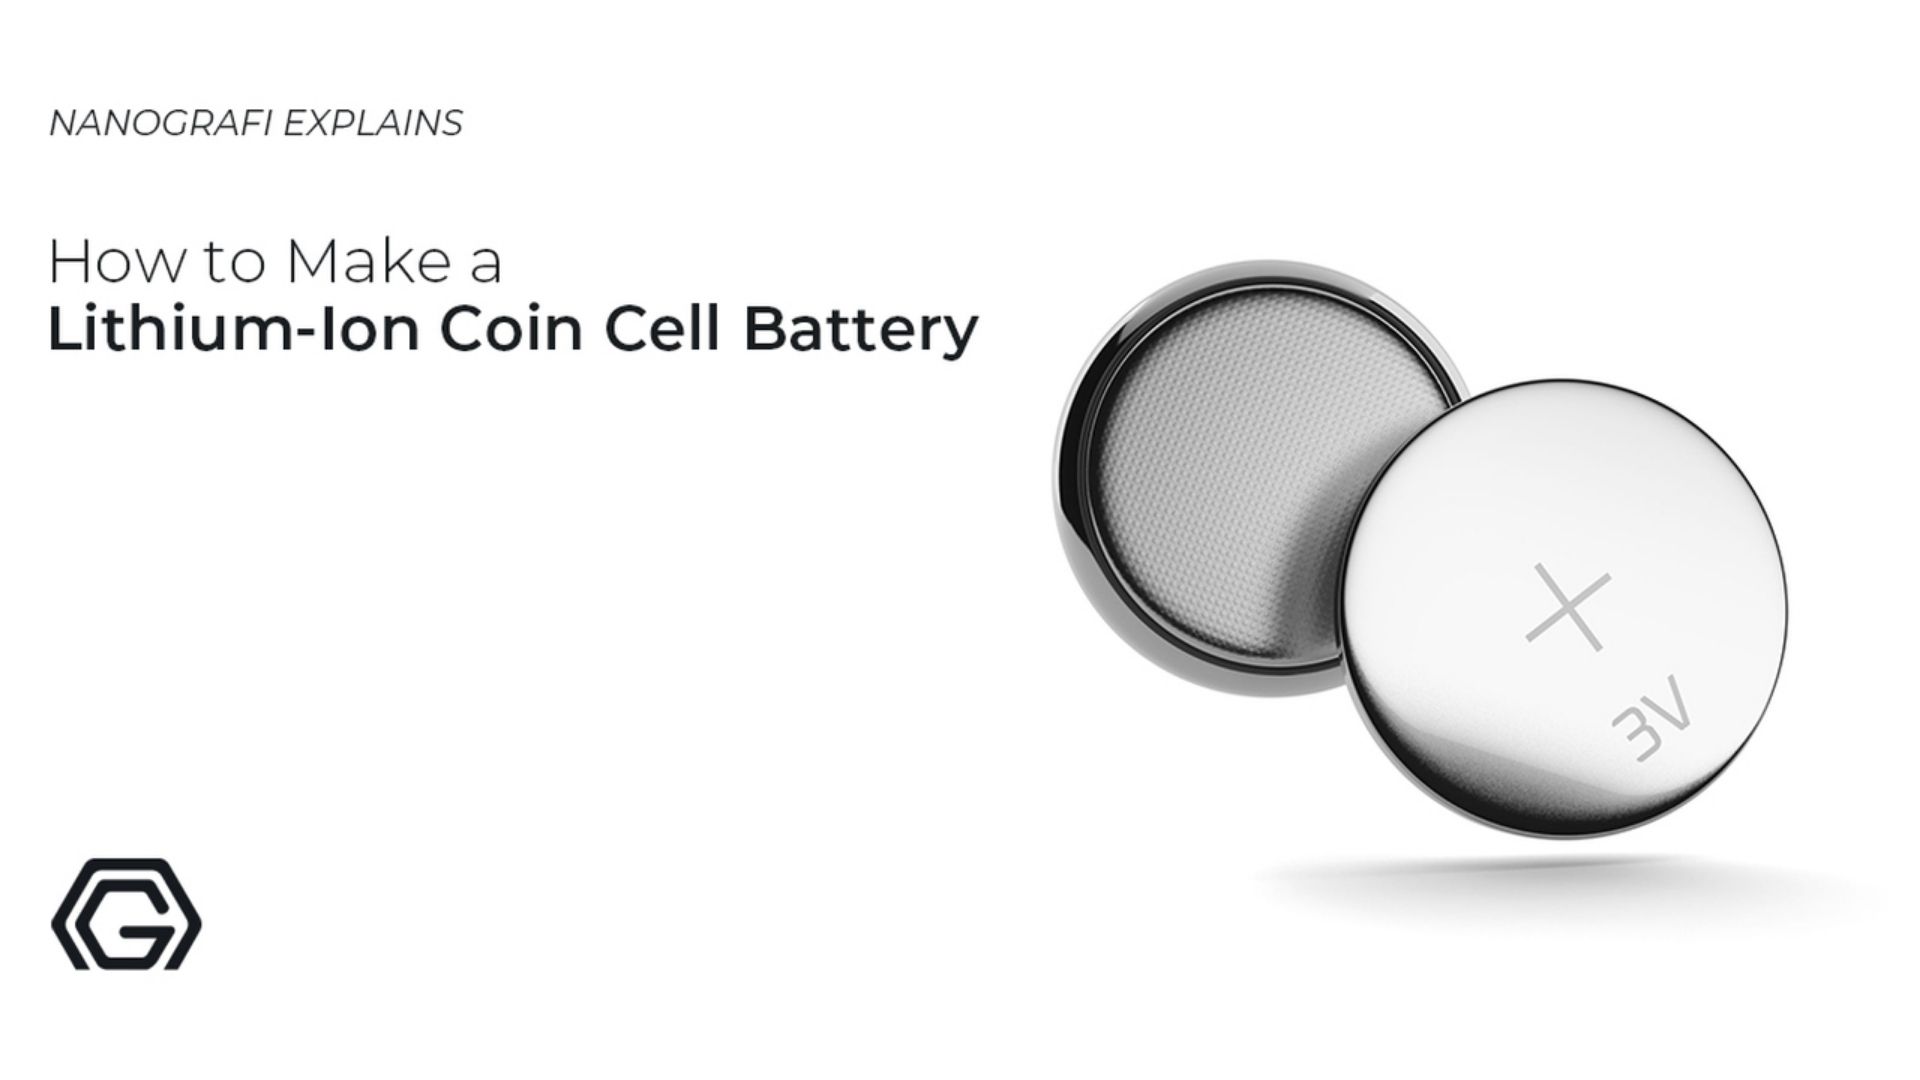 Lithium-ion  Coin Cell Batteries